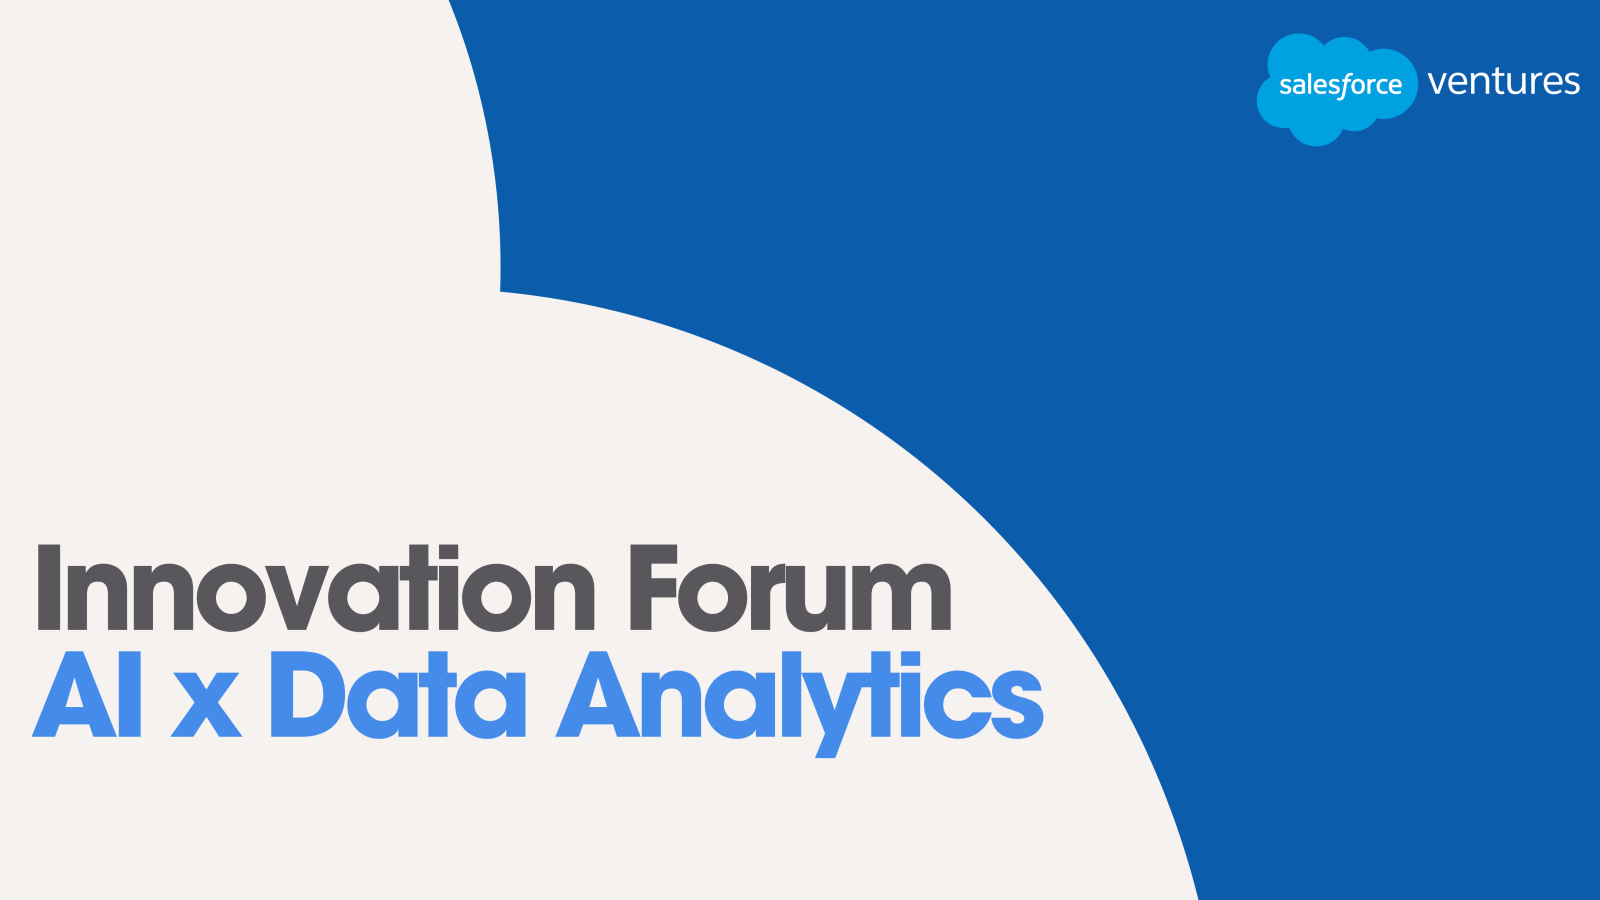 At the Intersection of Data + AI: Takeaways From Our Innovation Forum